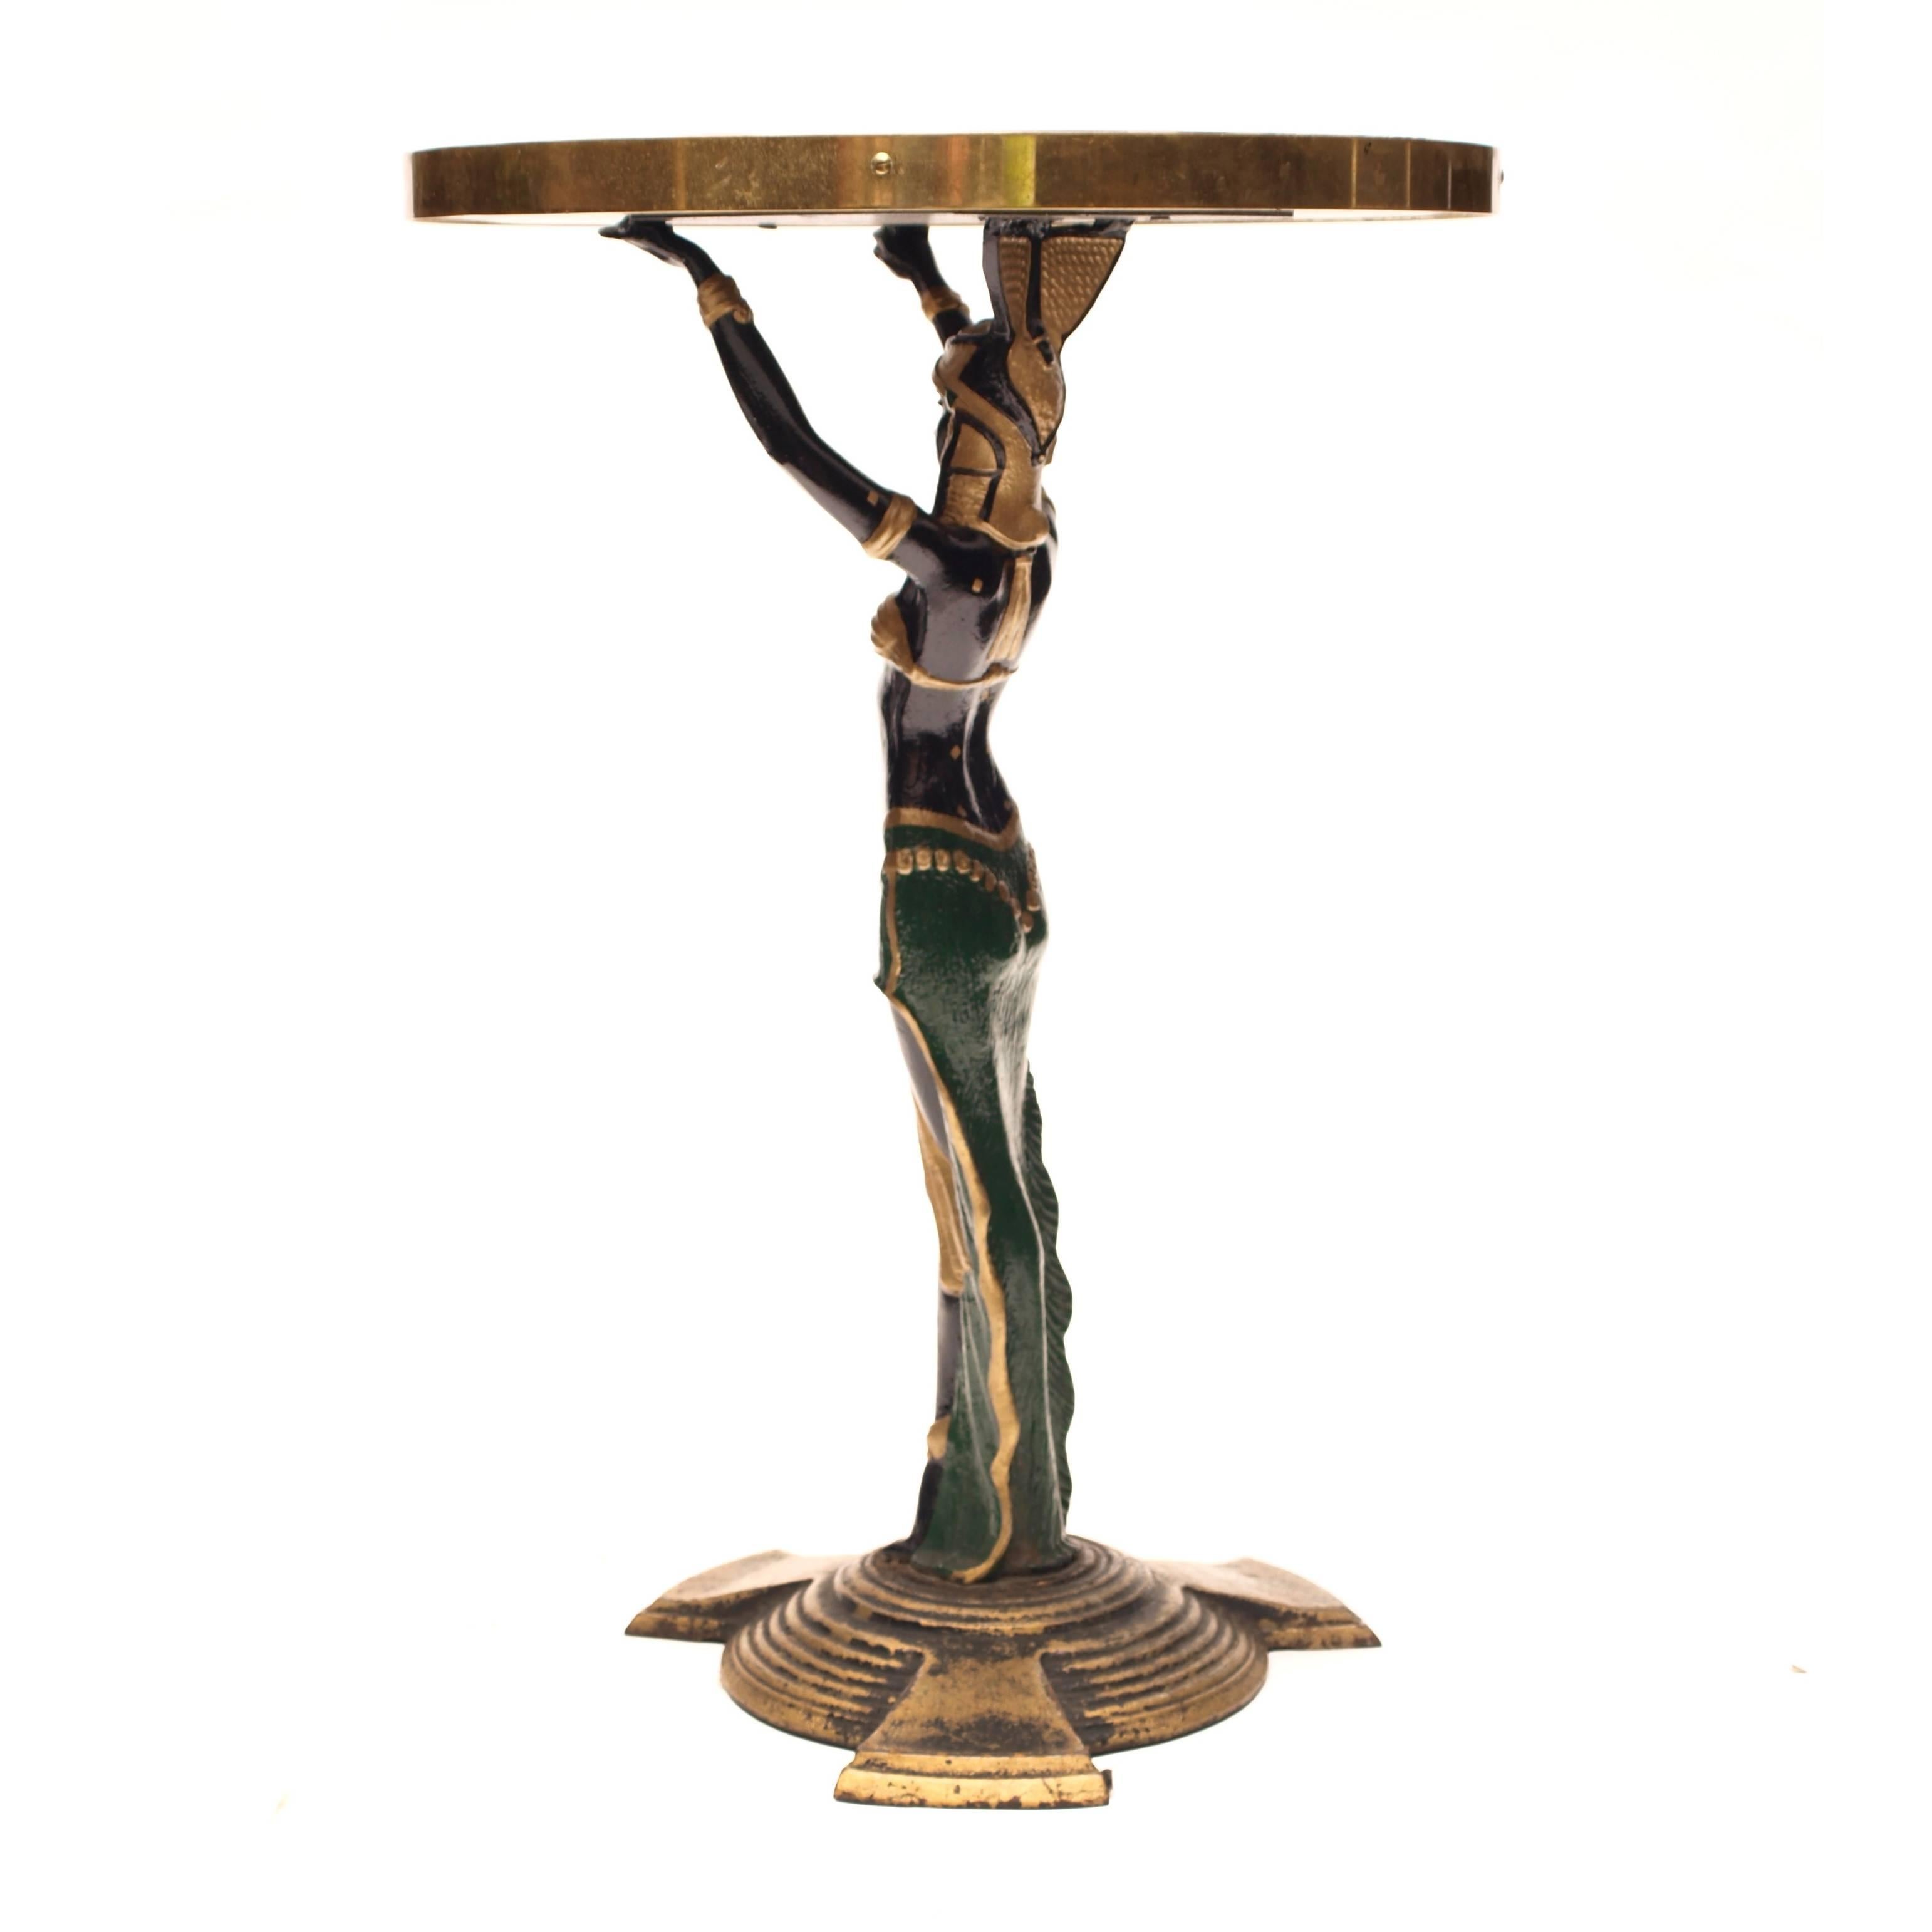 A pair of 1920s Art Deco cast iron table stands, with a later addition of black Formica and brass banded tops. 

Sourced from a Vaudeville-style music hall in the north of England, these naughty yet beautifully ornamental tables are an example of